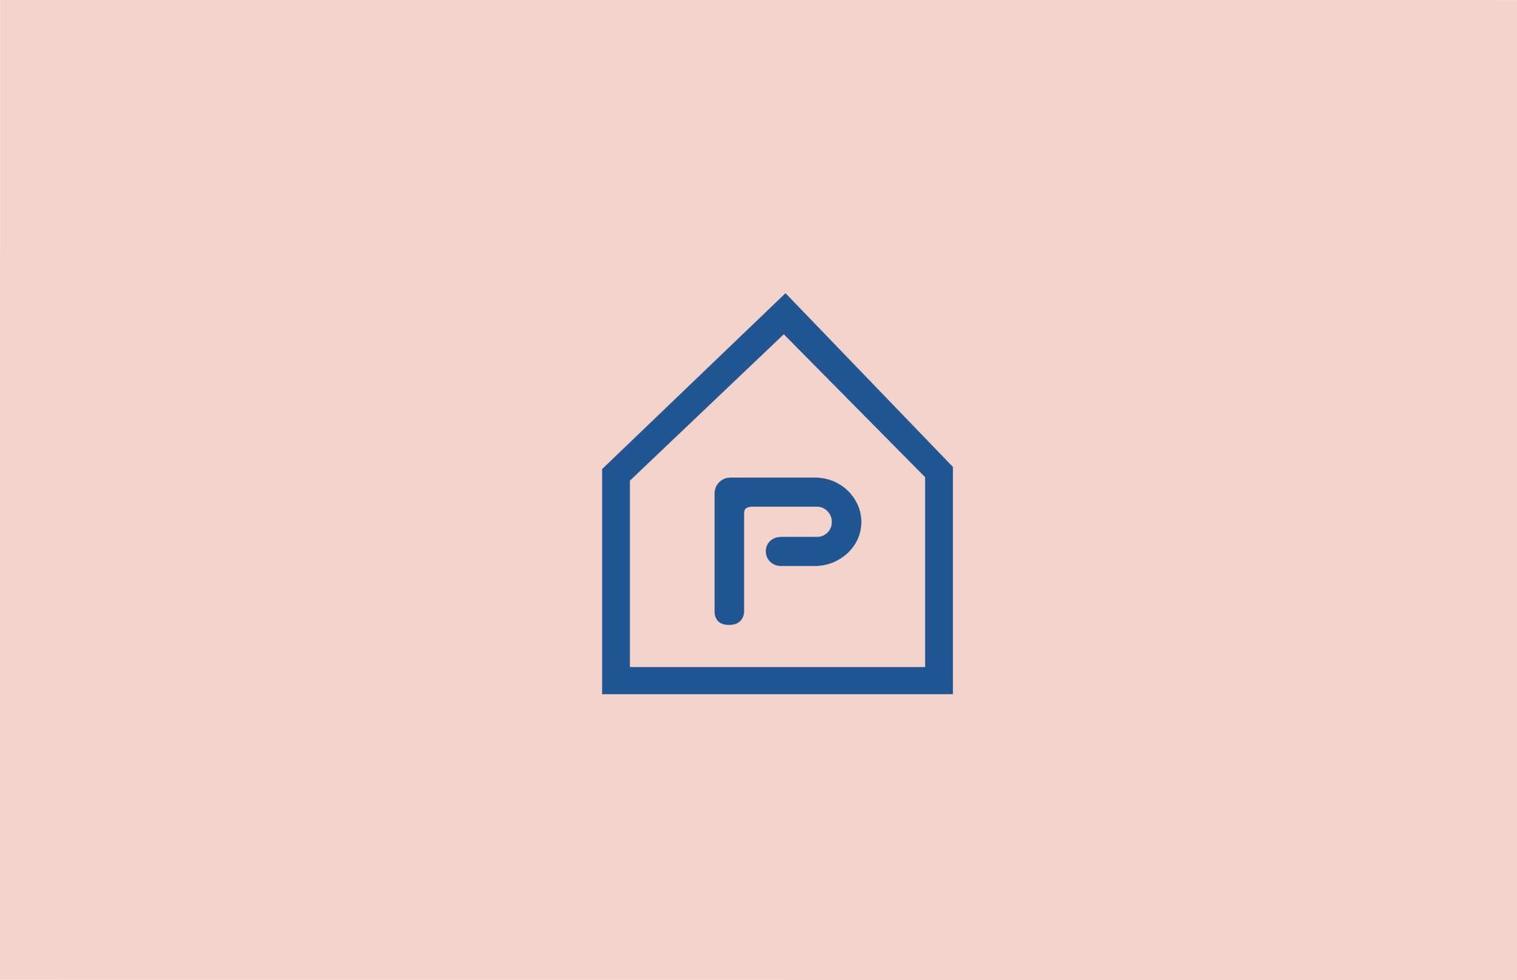 blue pink P alphabet letter logo icon for company and business with house design vector